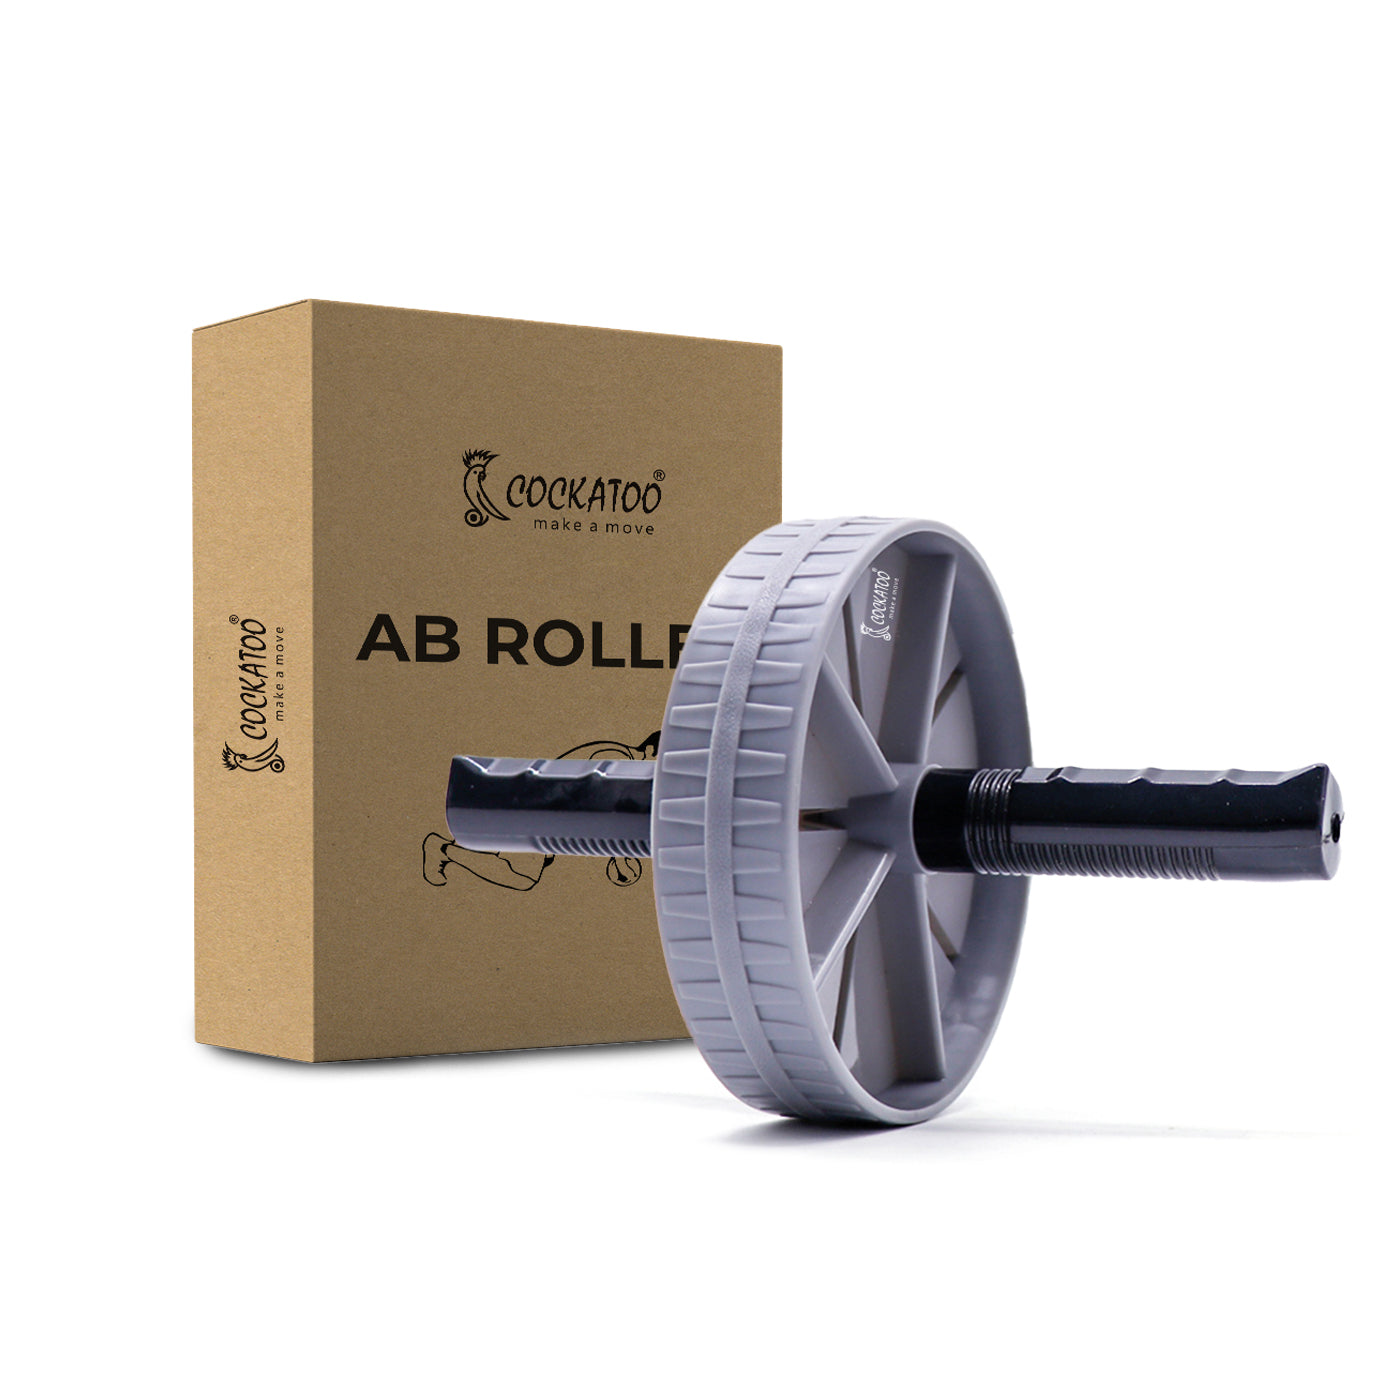 Cockatoo Ab Roller - Effective Abs Exercise Equipment for Men and Wome